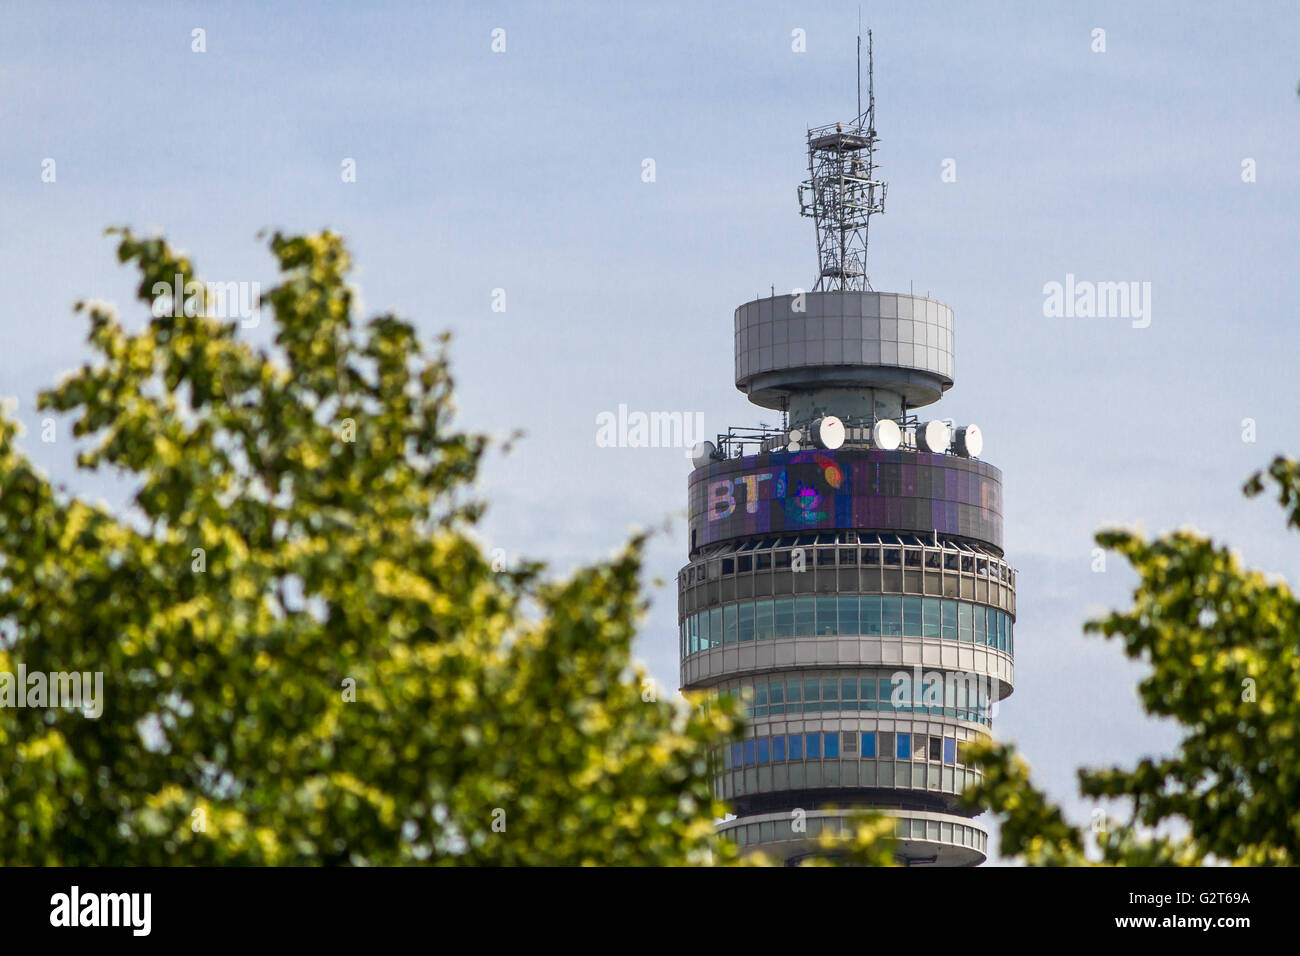 The BT Tower formerly known as The Post Office Tower  completed in 1964, seen through the trees from Regents Park in London, UK Stock Photo